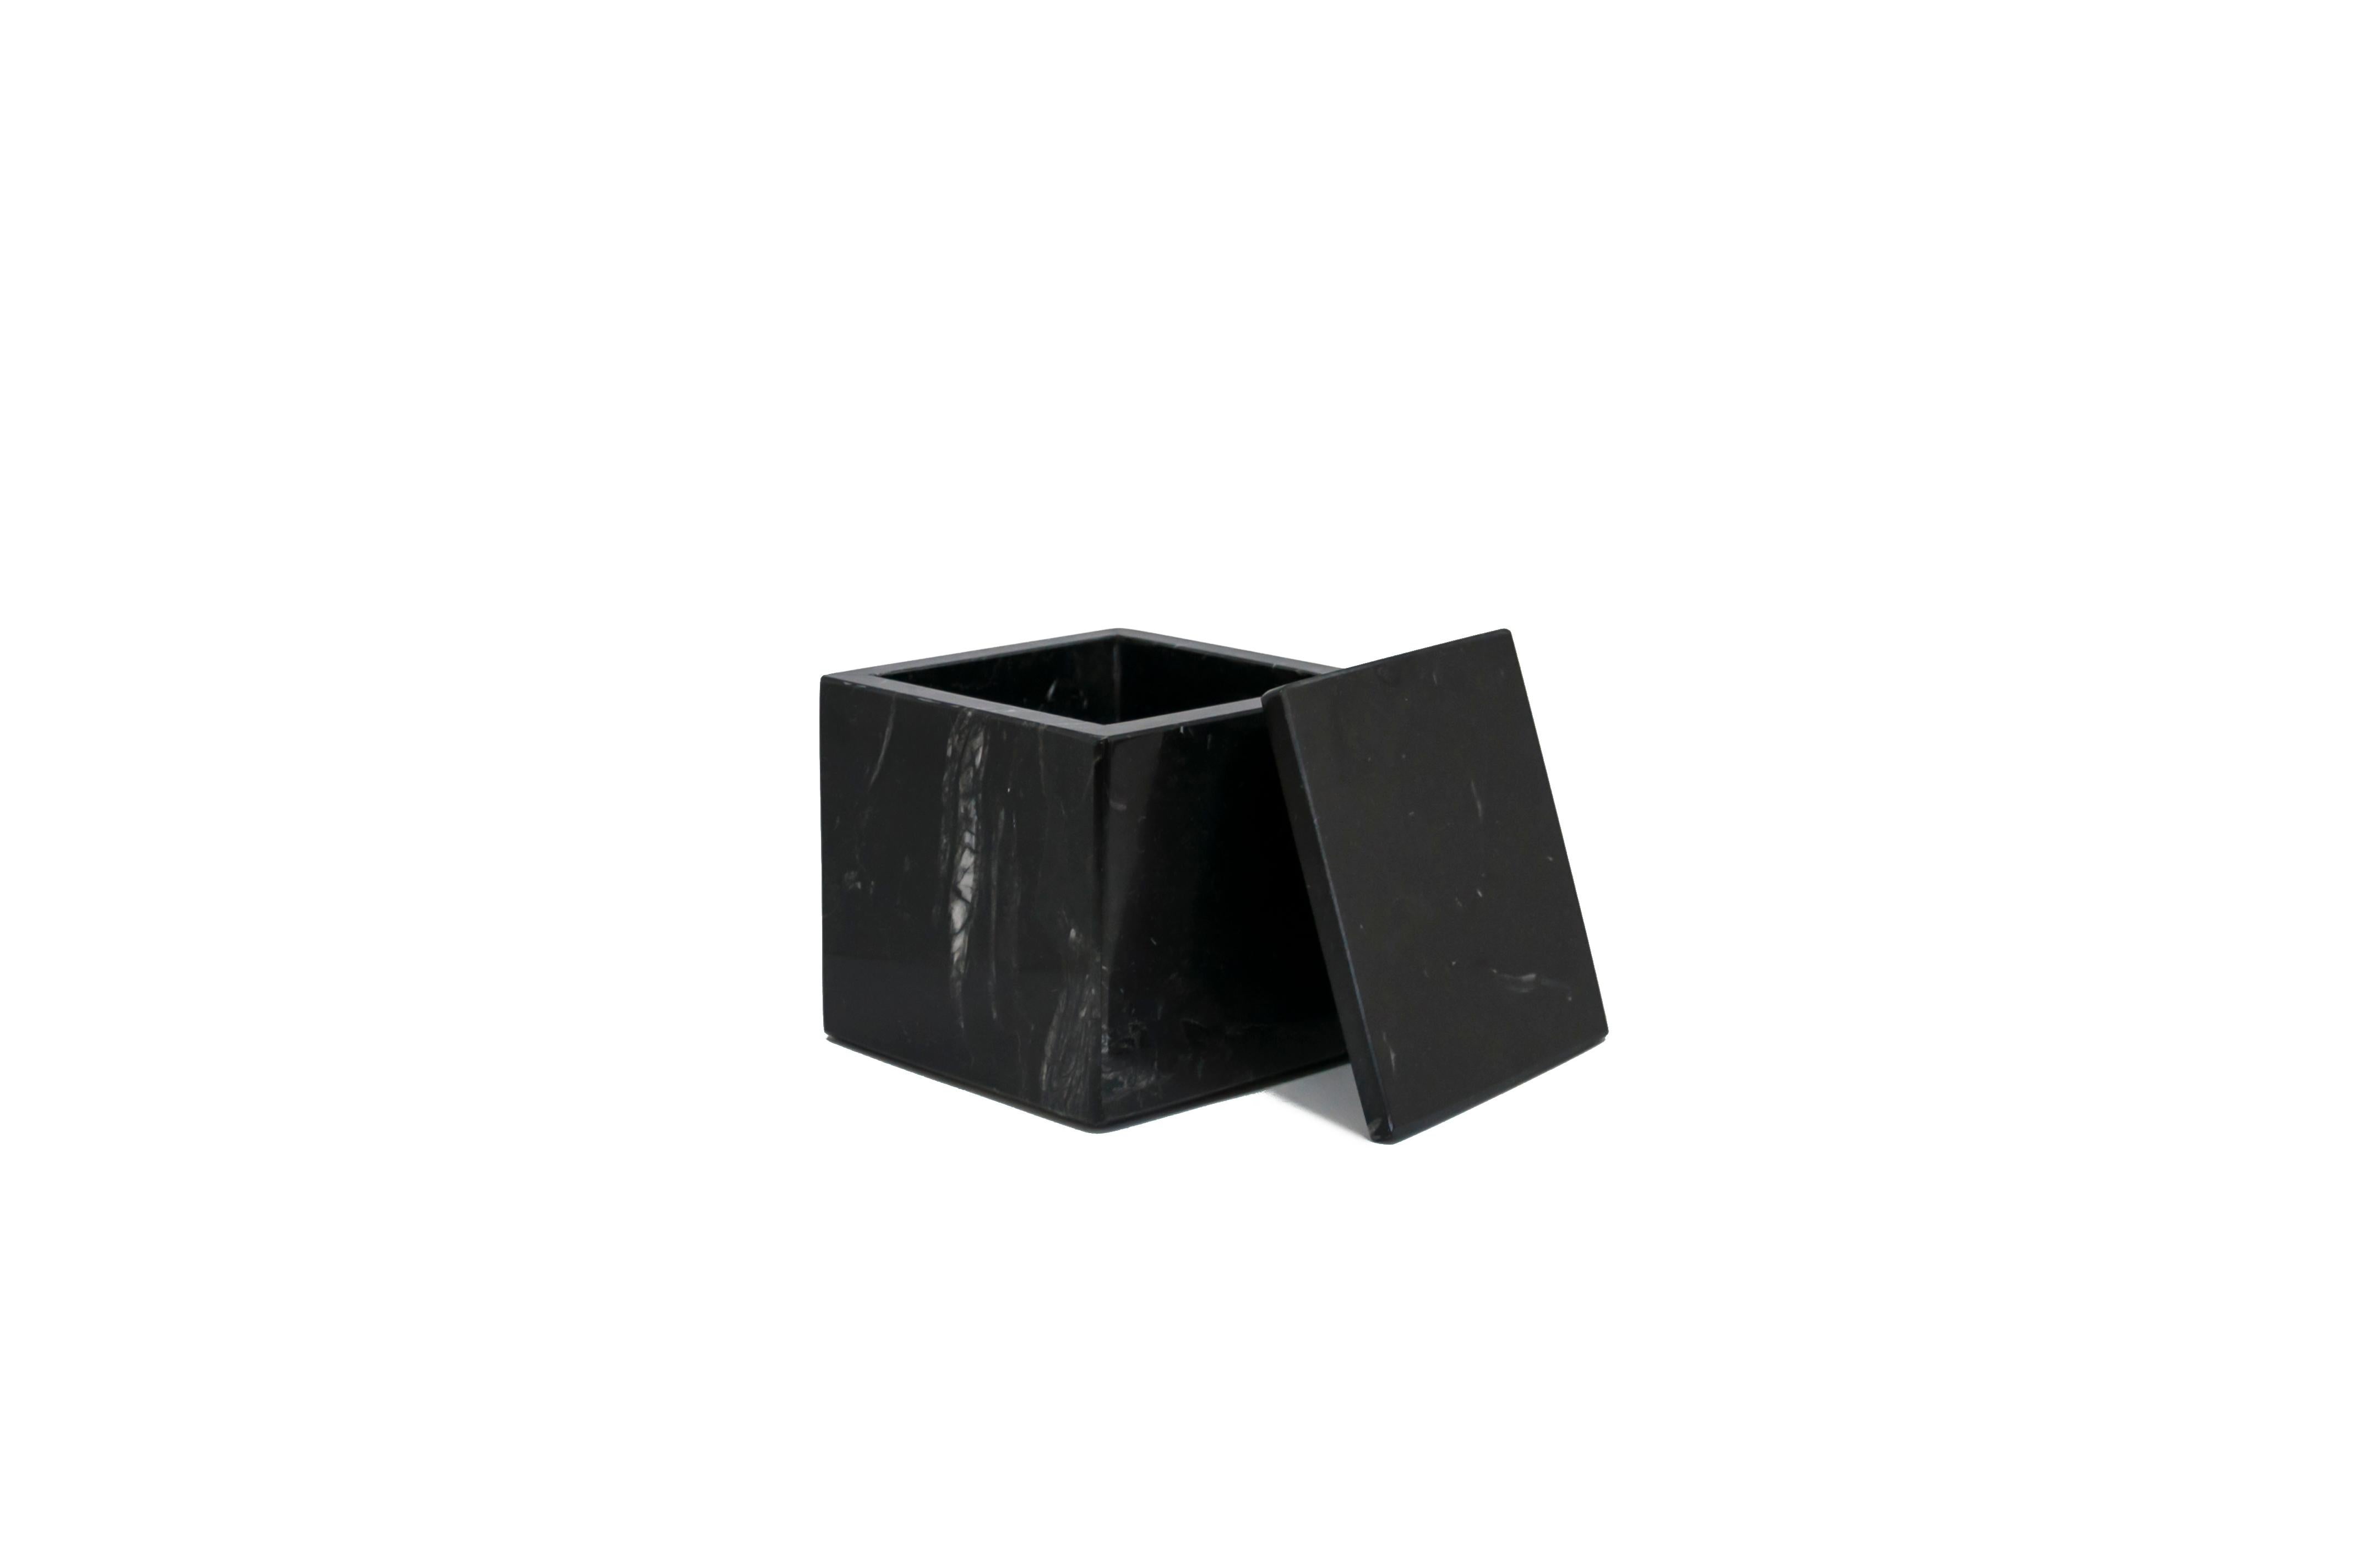 Squared black Marquina marble box with lid.
Each piece is in a way unique (since each marble block is different in veins and shades) and handcrafted in Italy. Slight variations in shape, color and size are to be considered a guarantee of an